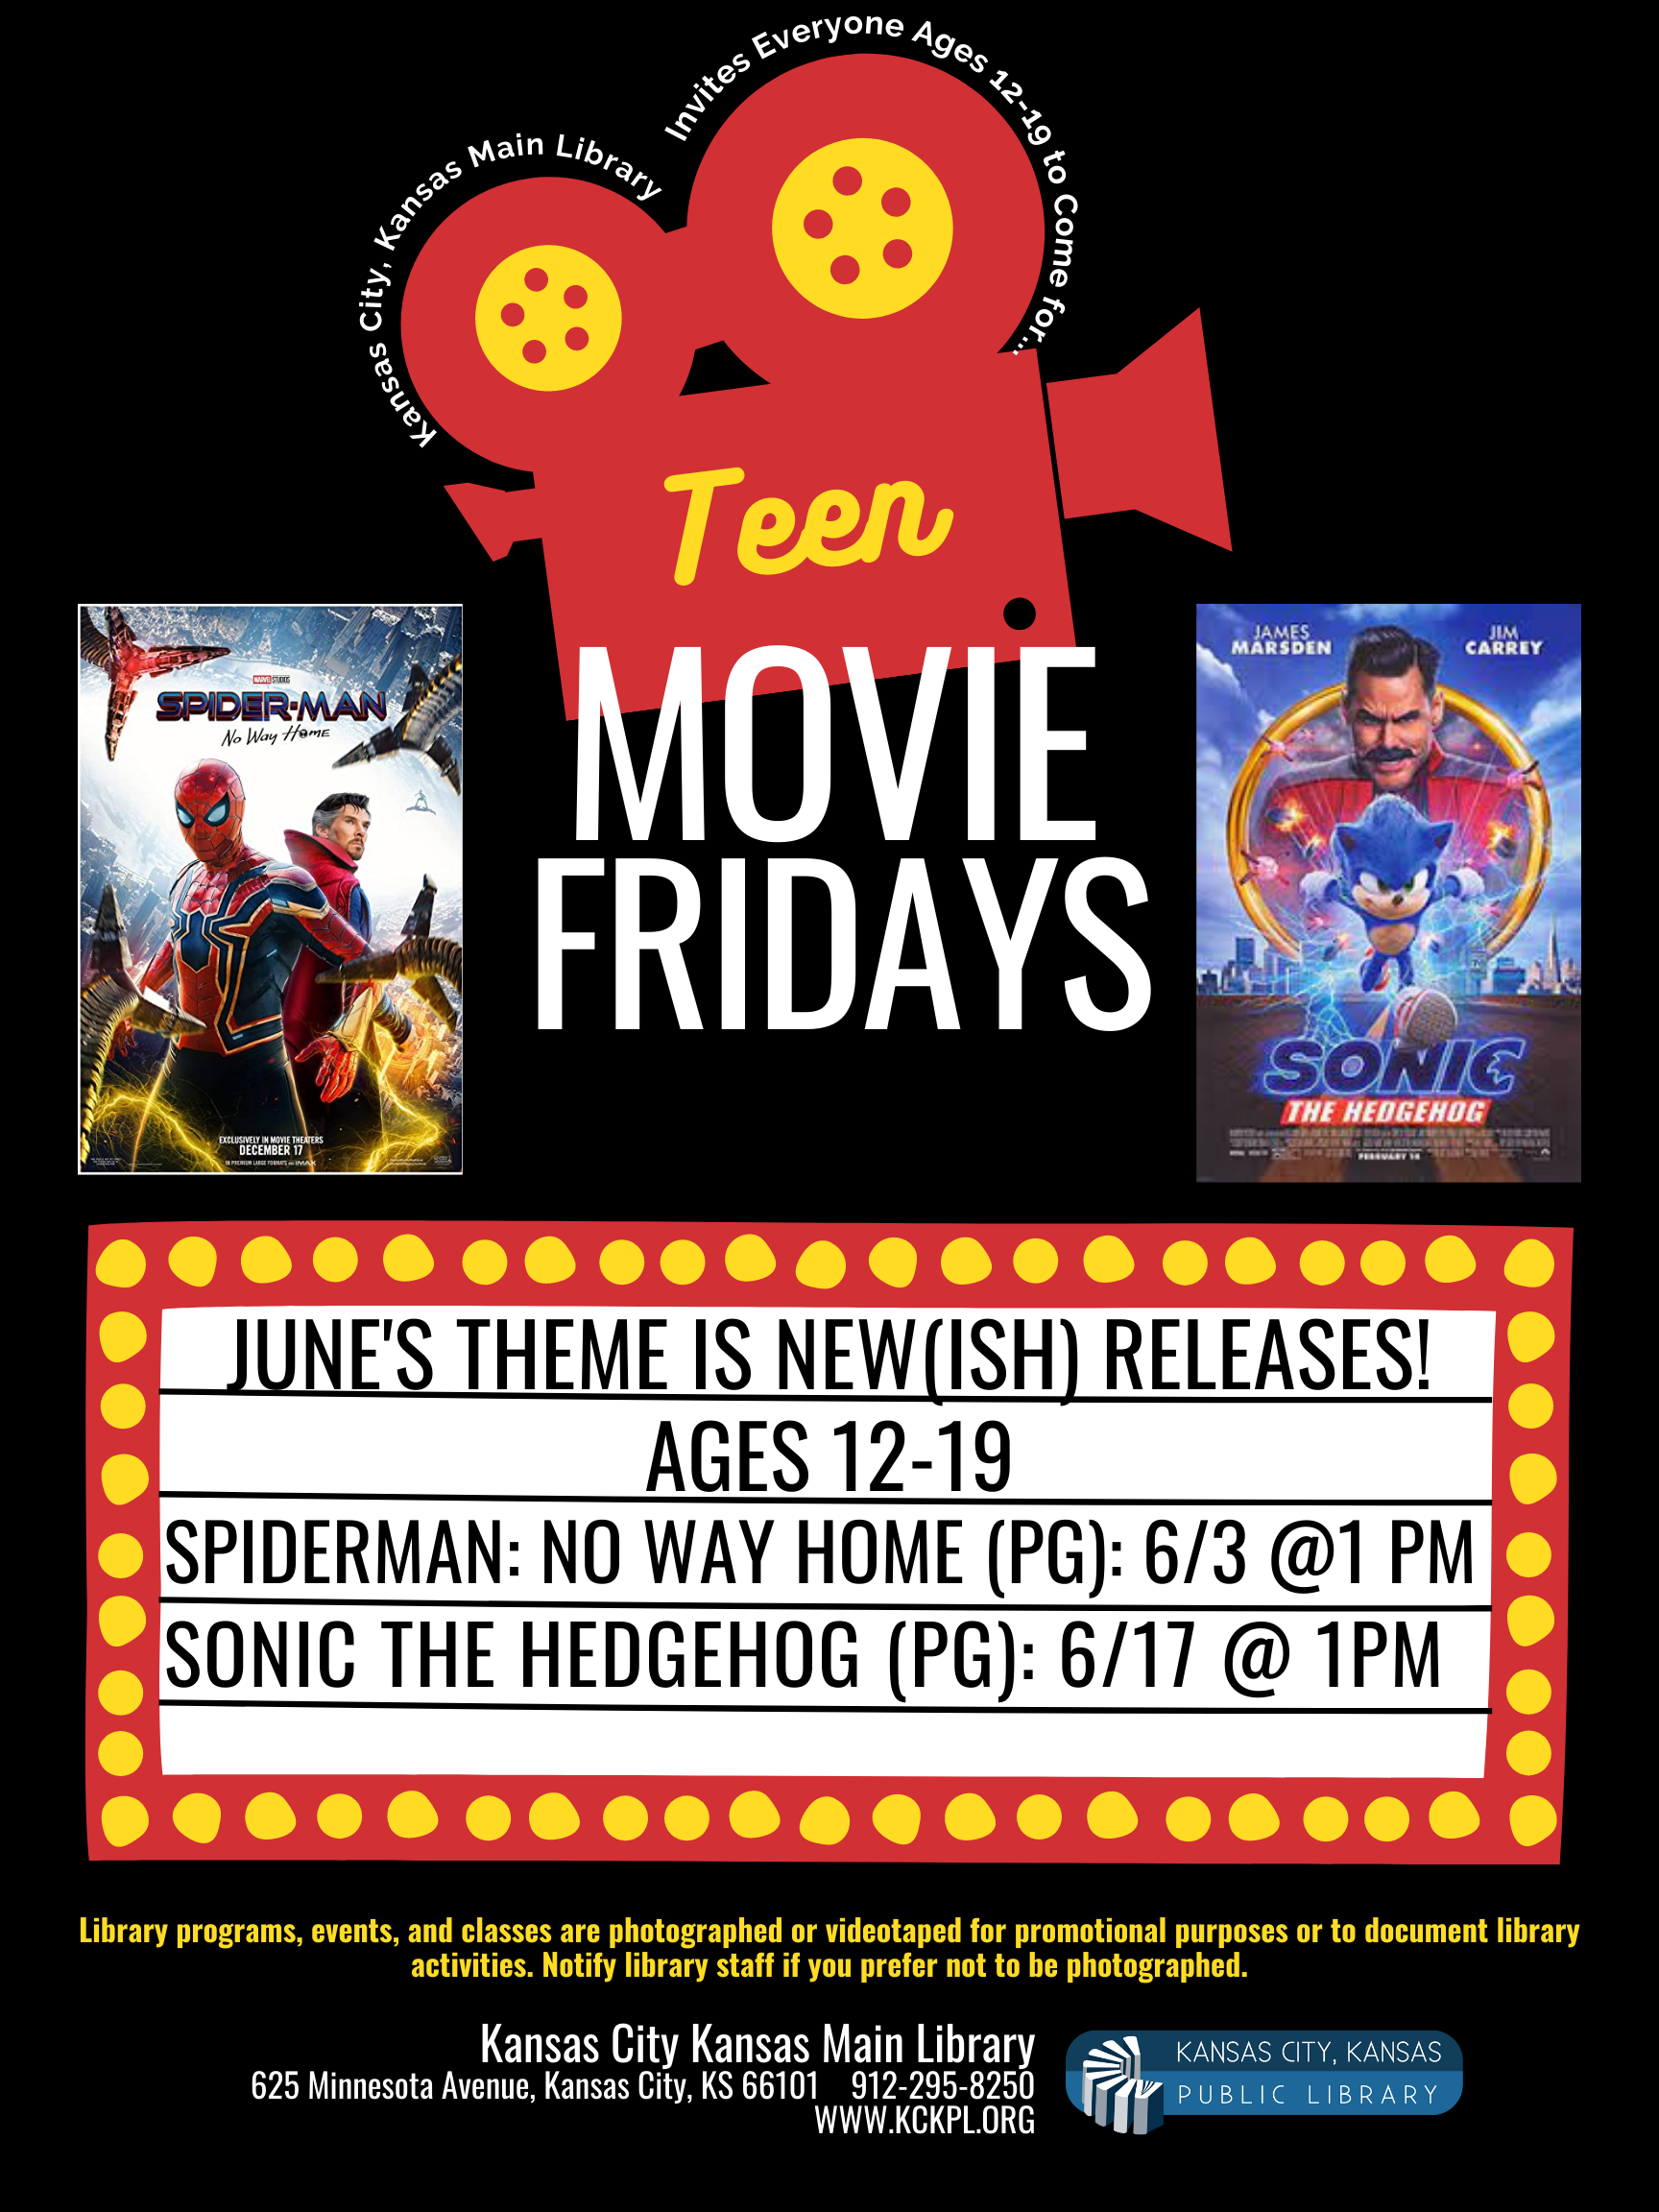 teen movie with posters for Spiderman: No Way Home